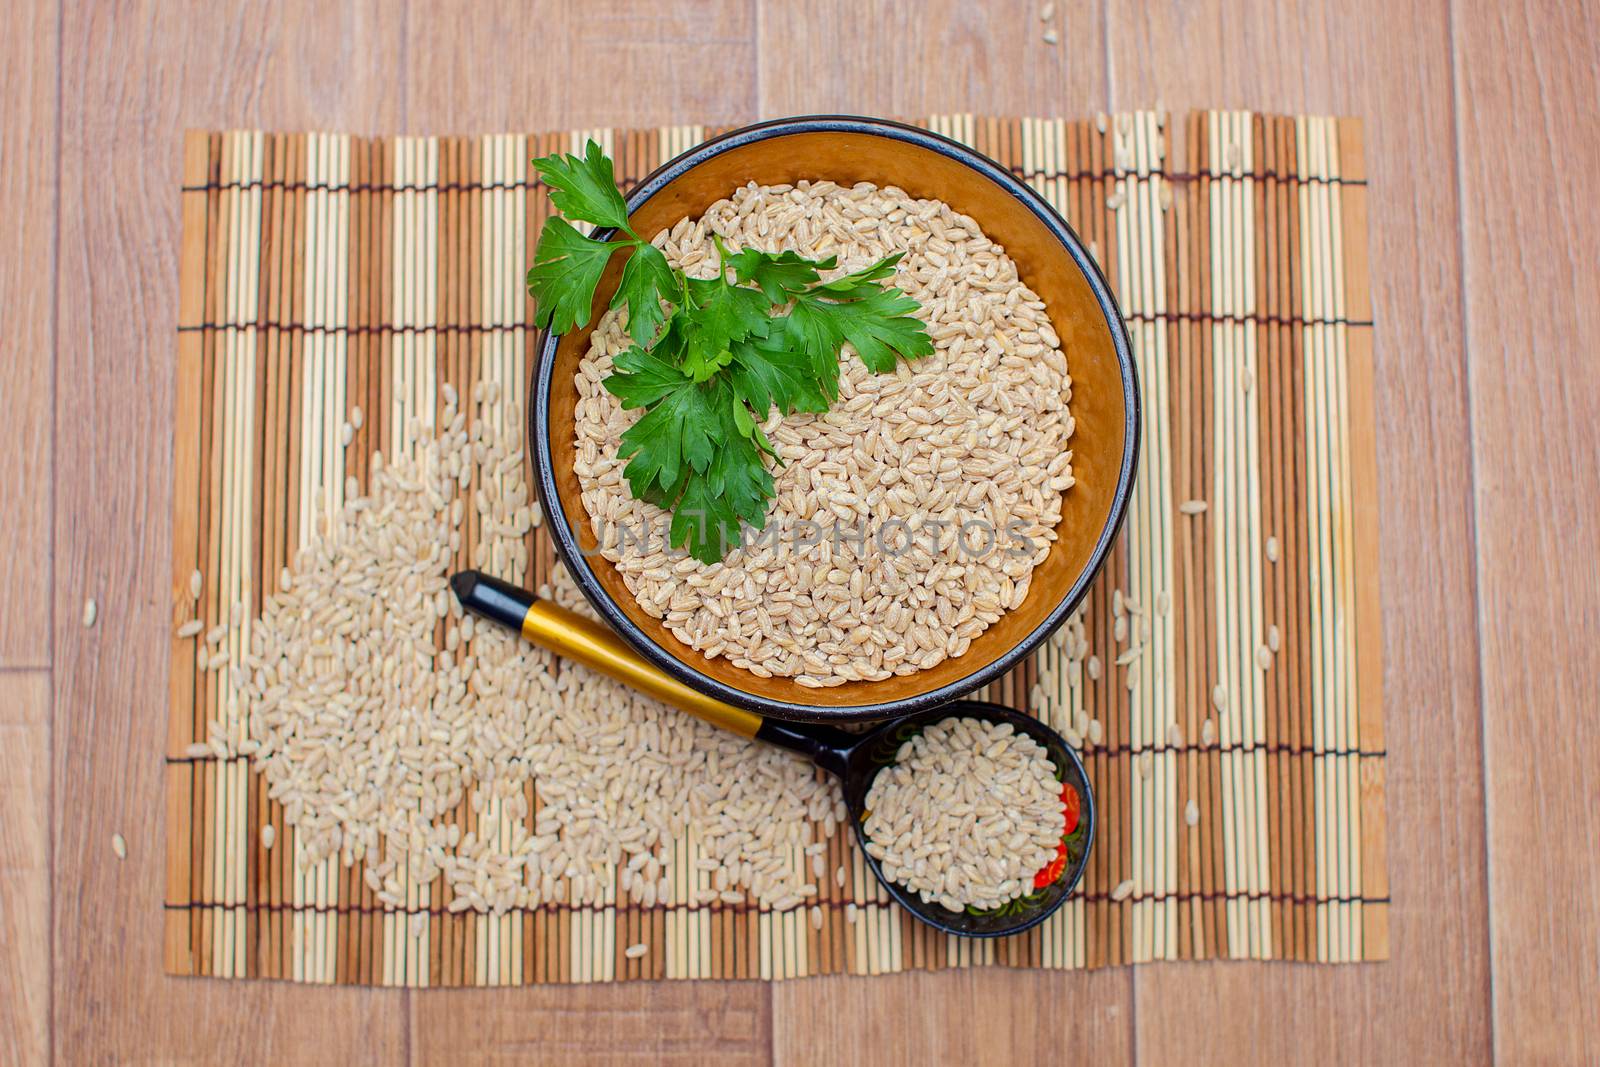 The wooden plate with pearl barley decorated with parsley, Khokhloma